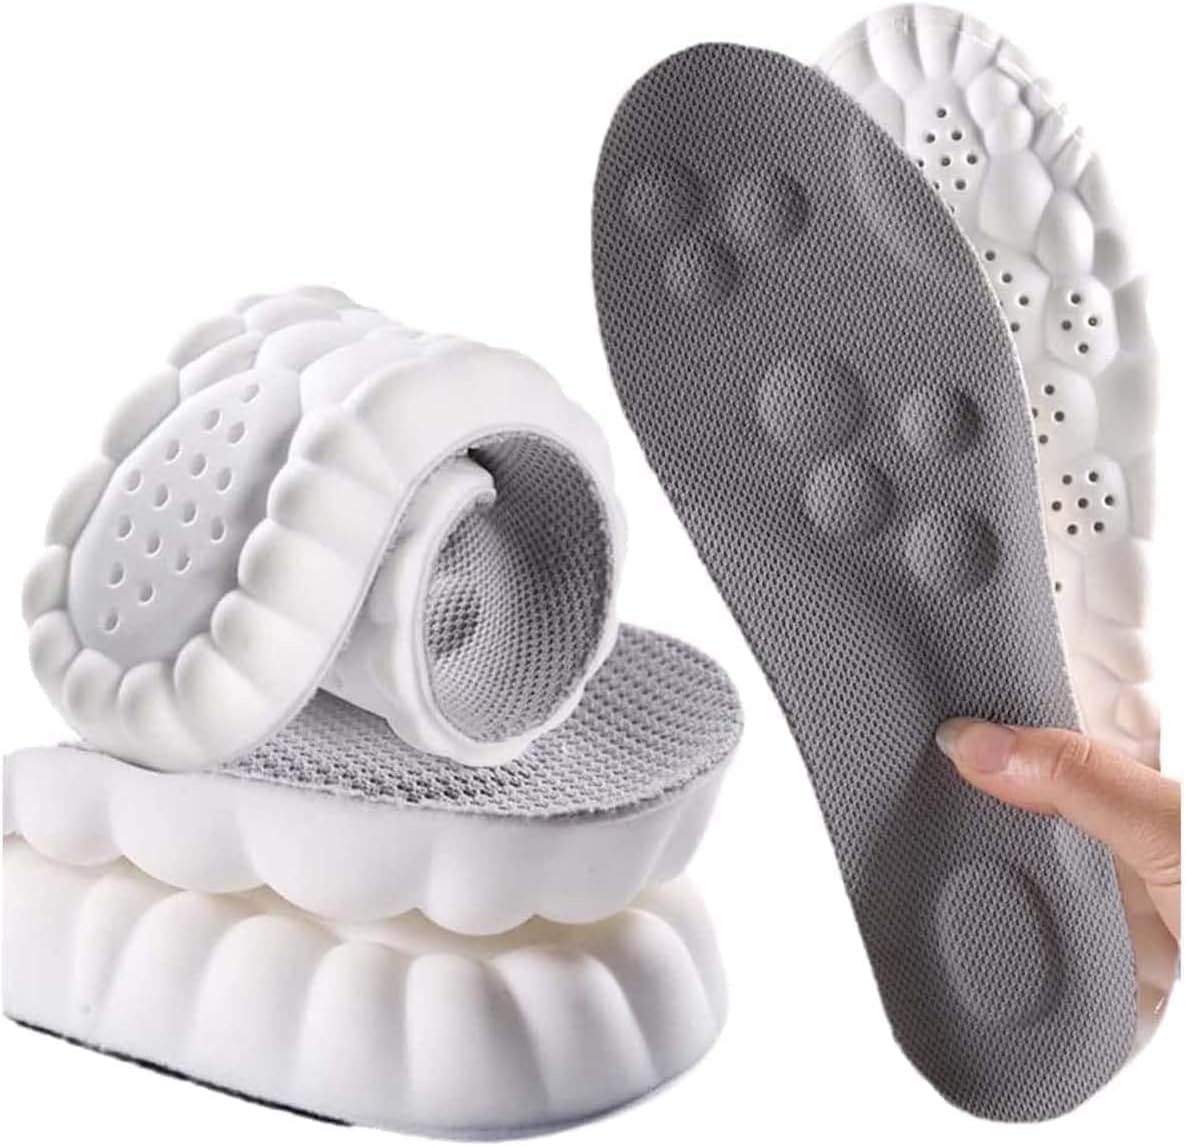 4D Insoles-4D Cloud Technology Insole,Metatarsal Orthotic Insoles Arch Supports Inserts, High-Elastic Shock-Absorbing Insoles,Plantar Fasciitis, Ball of Foot Pain Relief (45-46, gray)